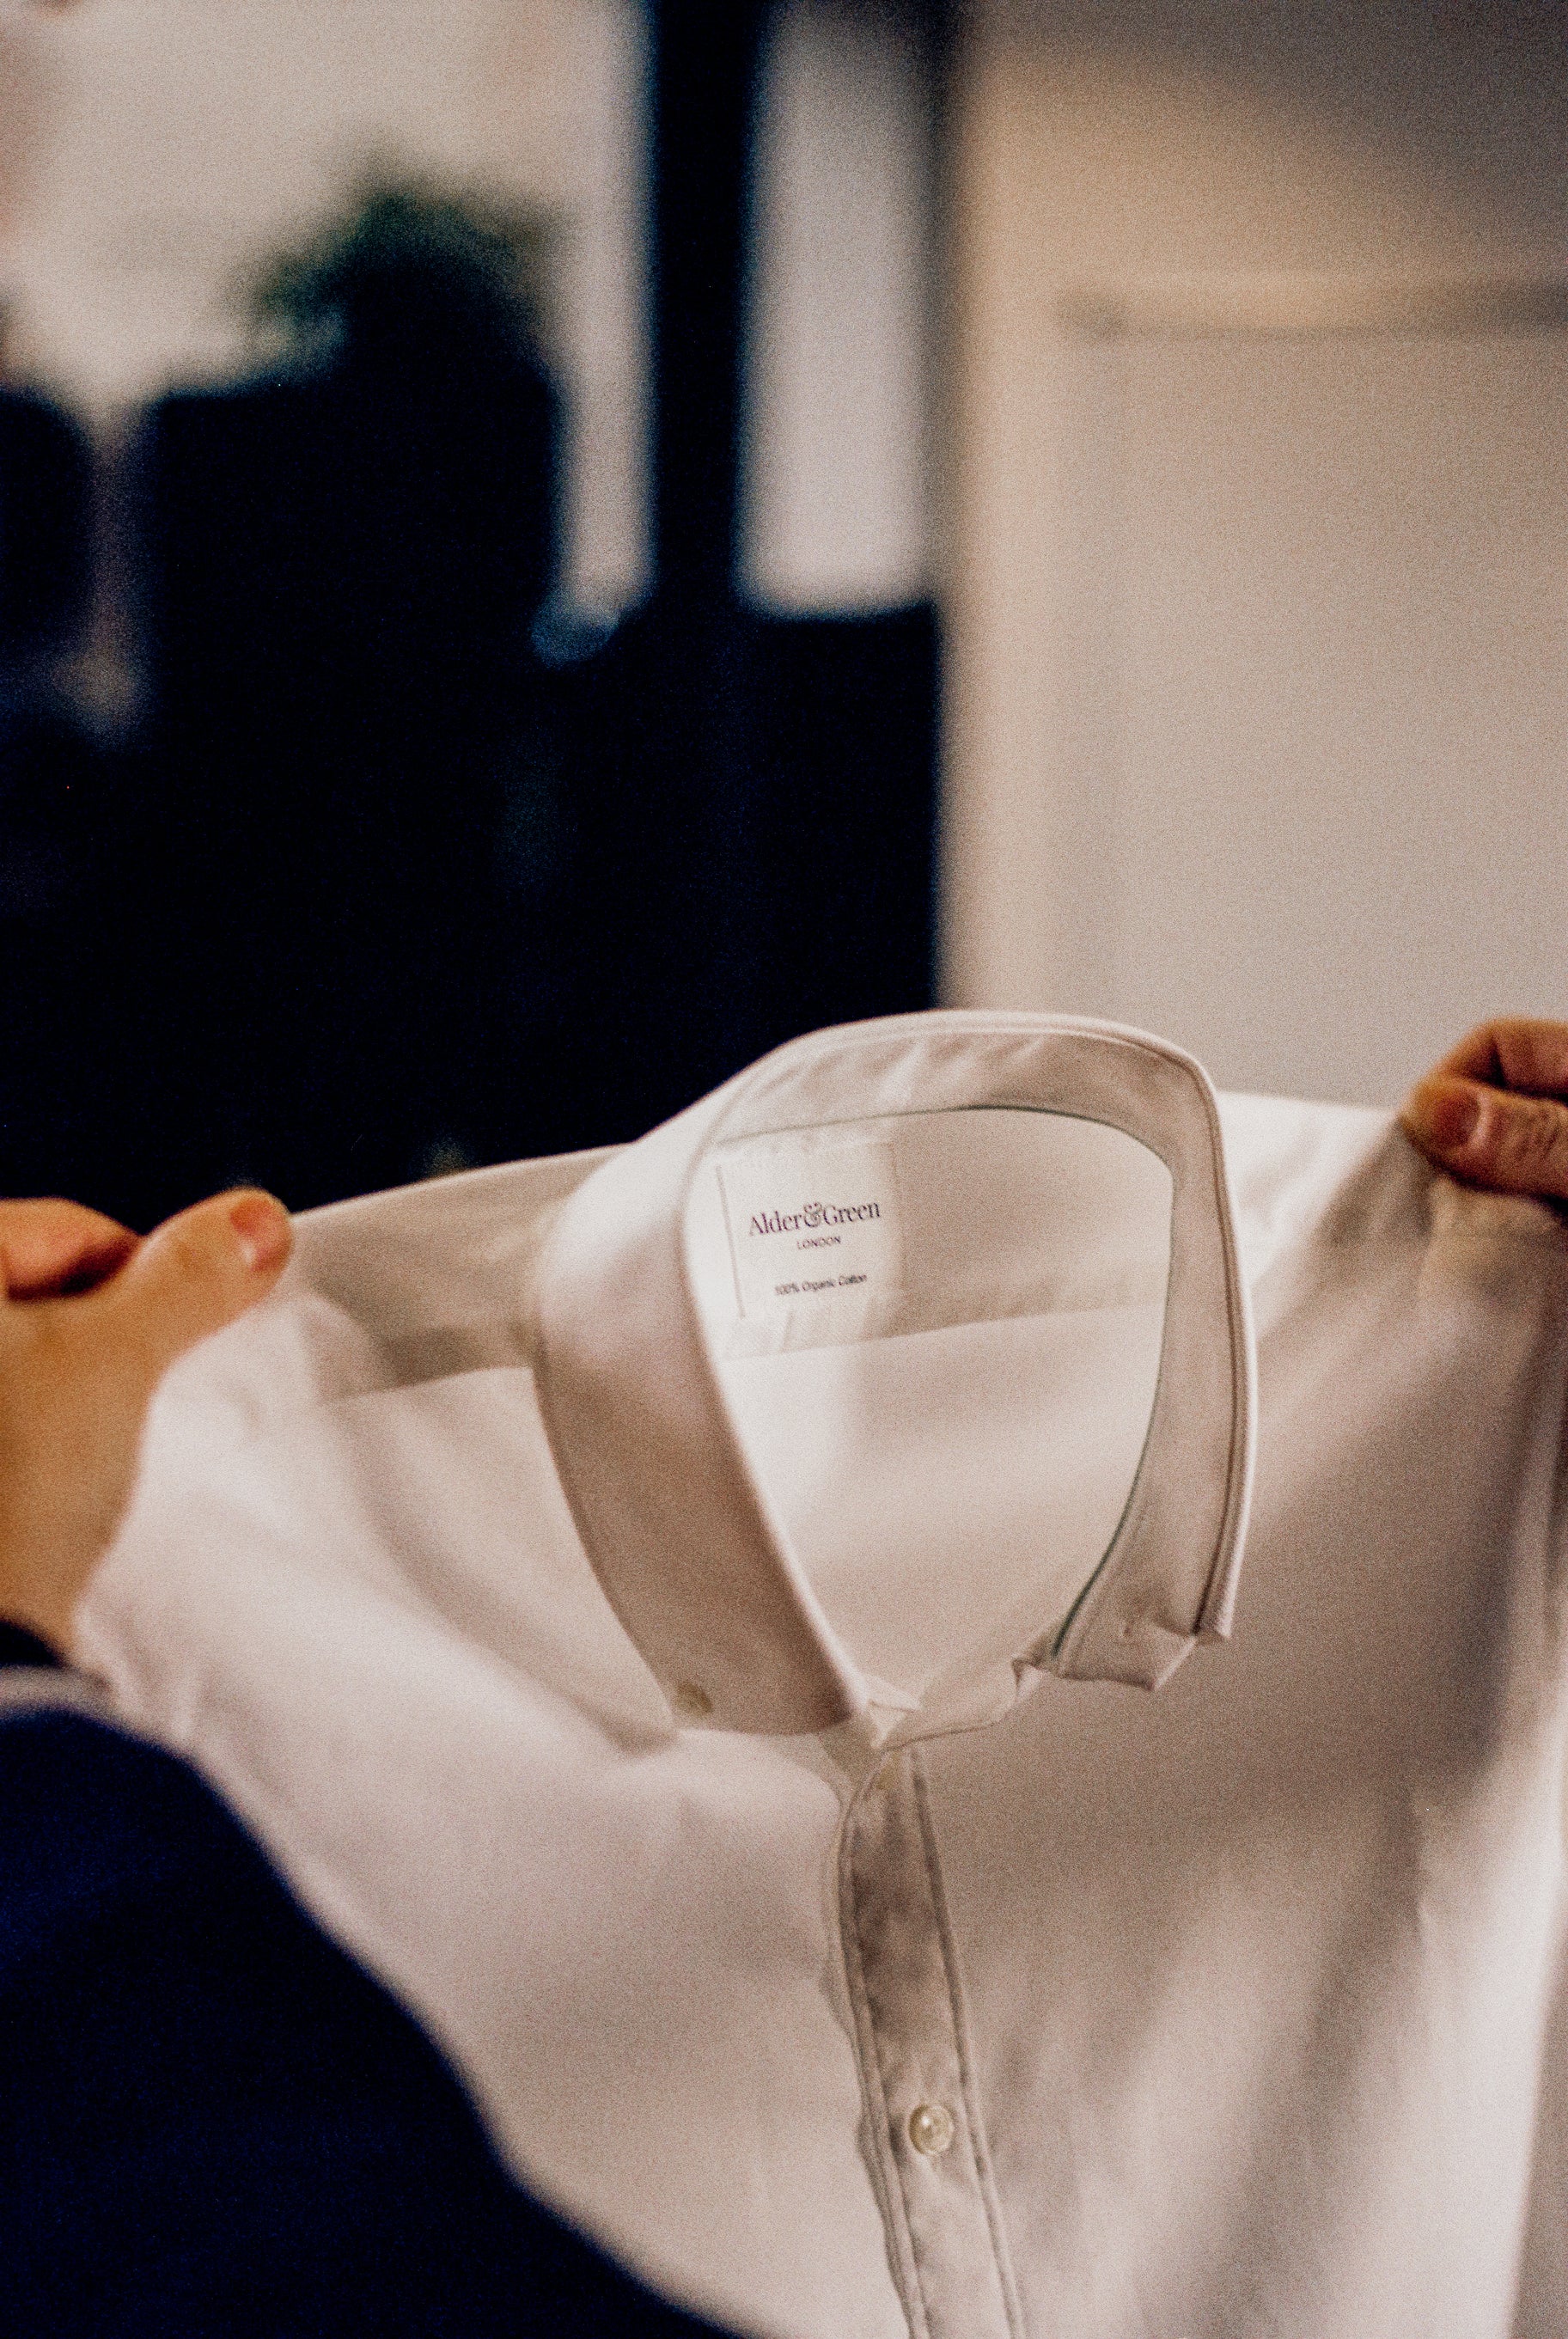 How to Measure for the Perfect Shirt